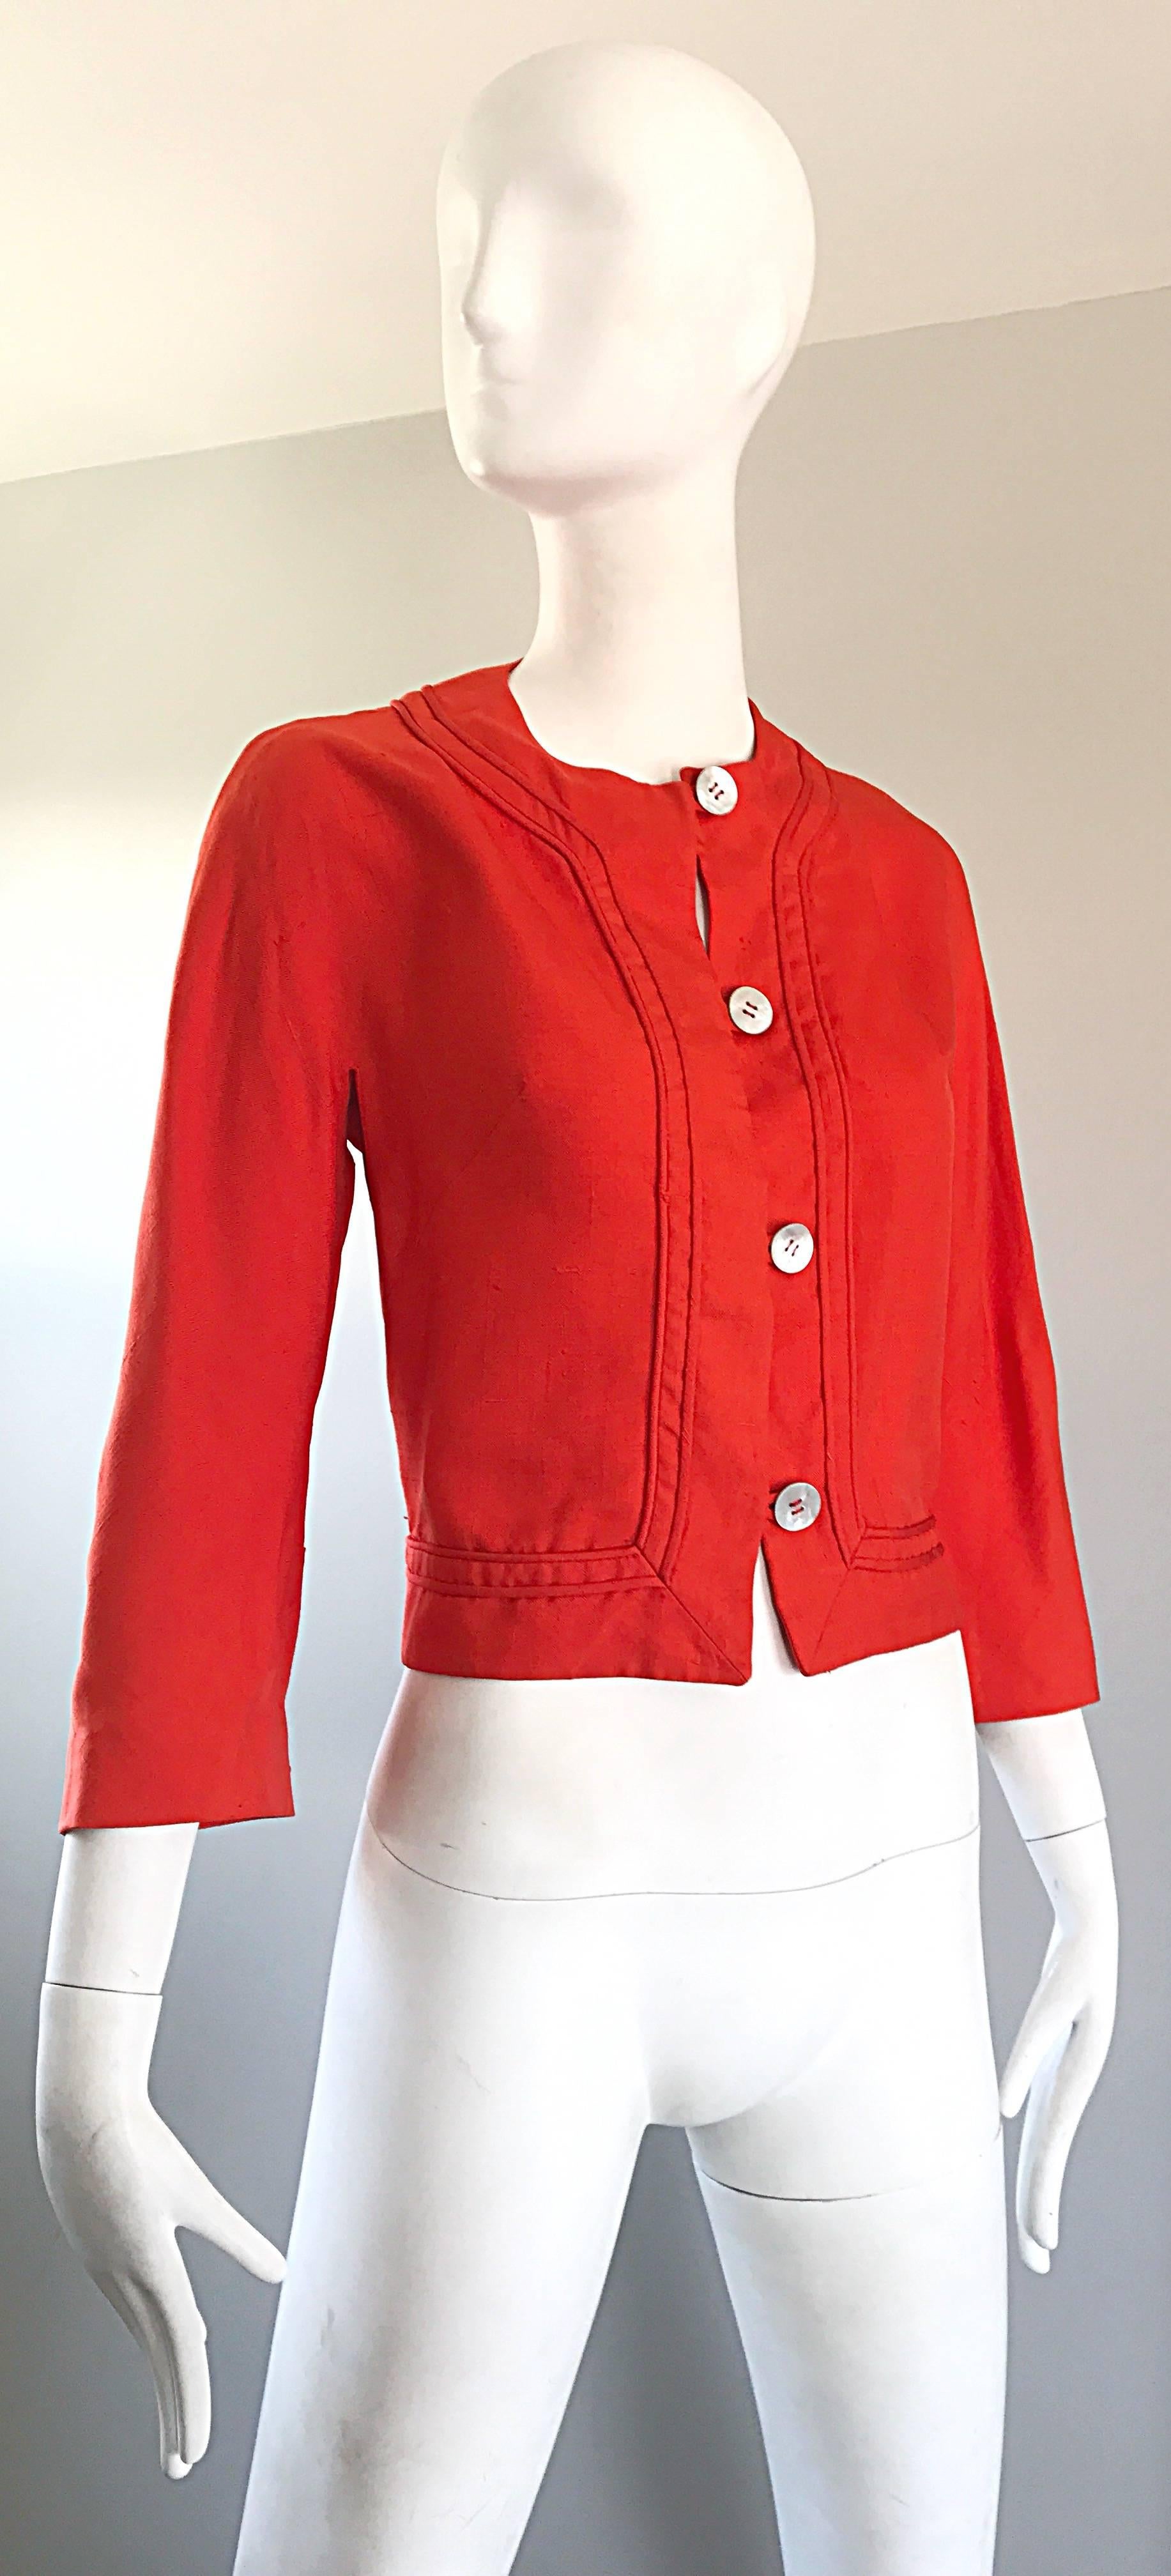 Chic and rare 1960s ABERCROMBIE & FITCH orange linen cropped jacket! Features luxurious soft Irish linen and original mother of pearl round buttons up the front. Can easily be dressed up or down with shorts, jeans, trousers, or a skirt. Would look